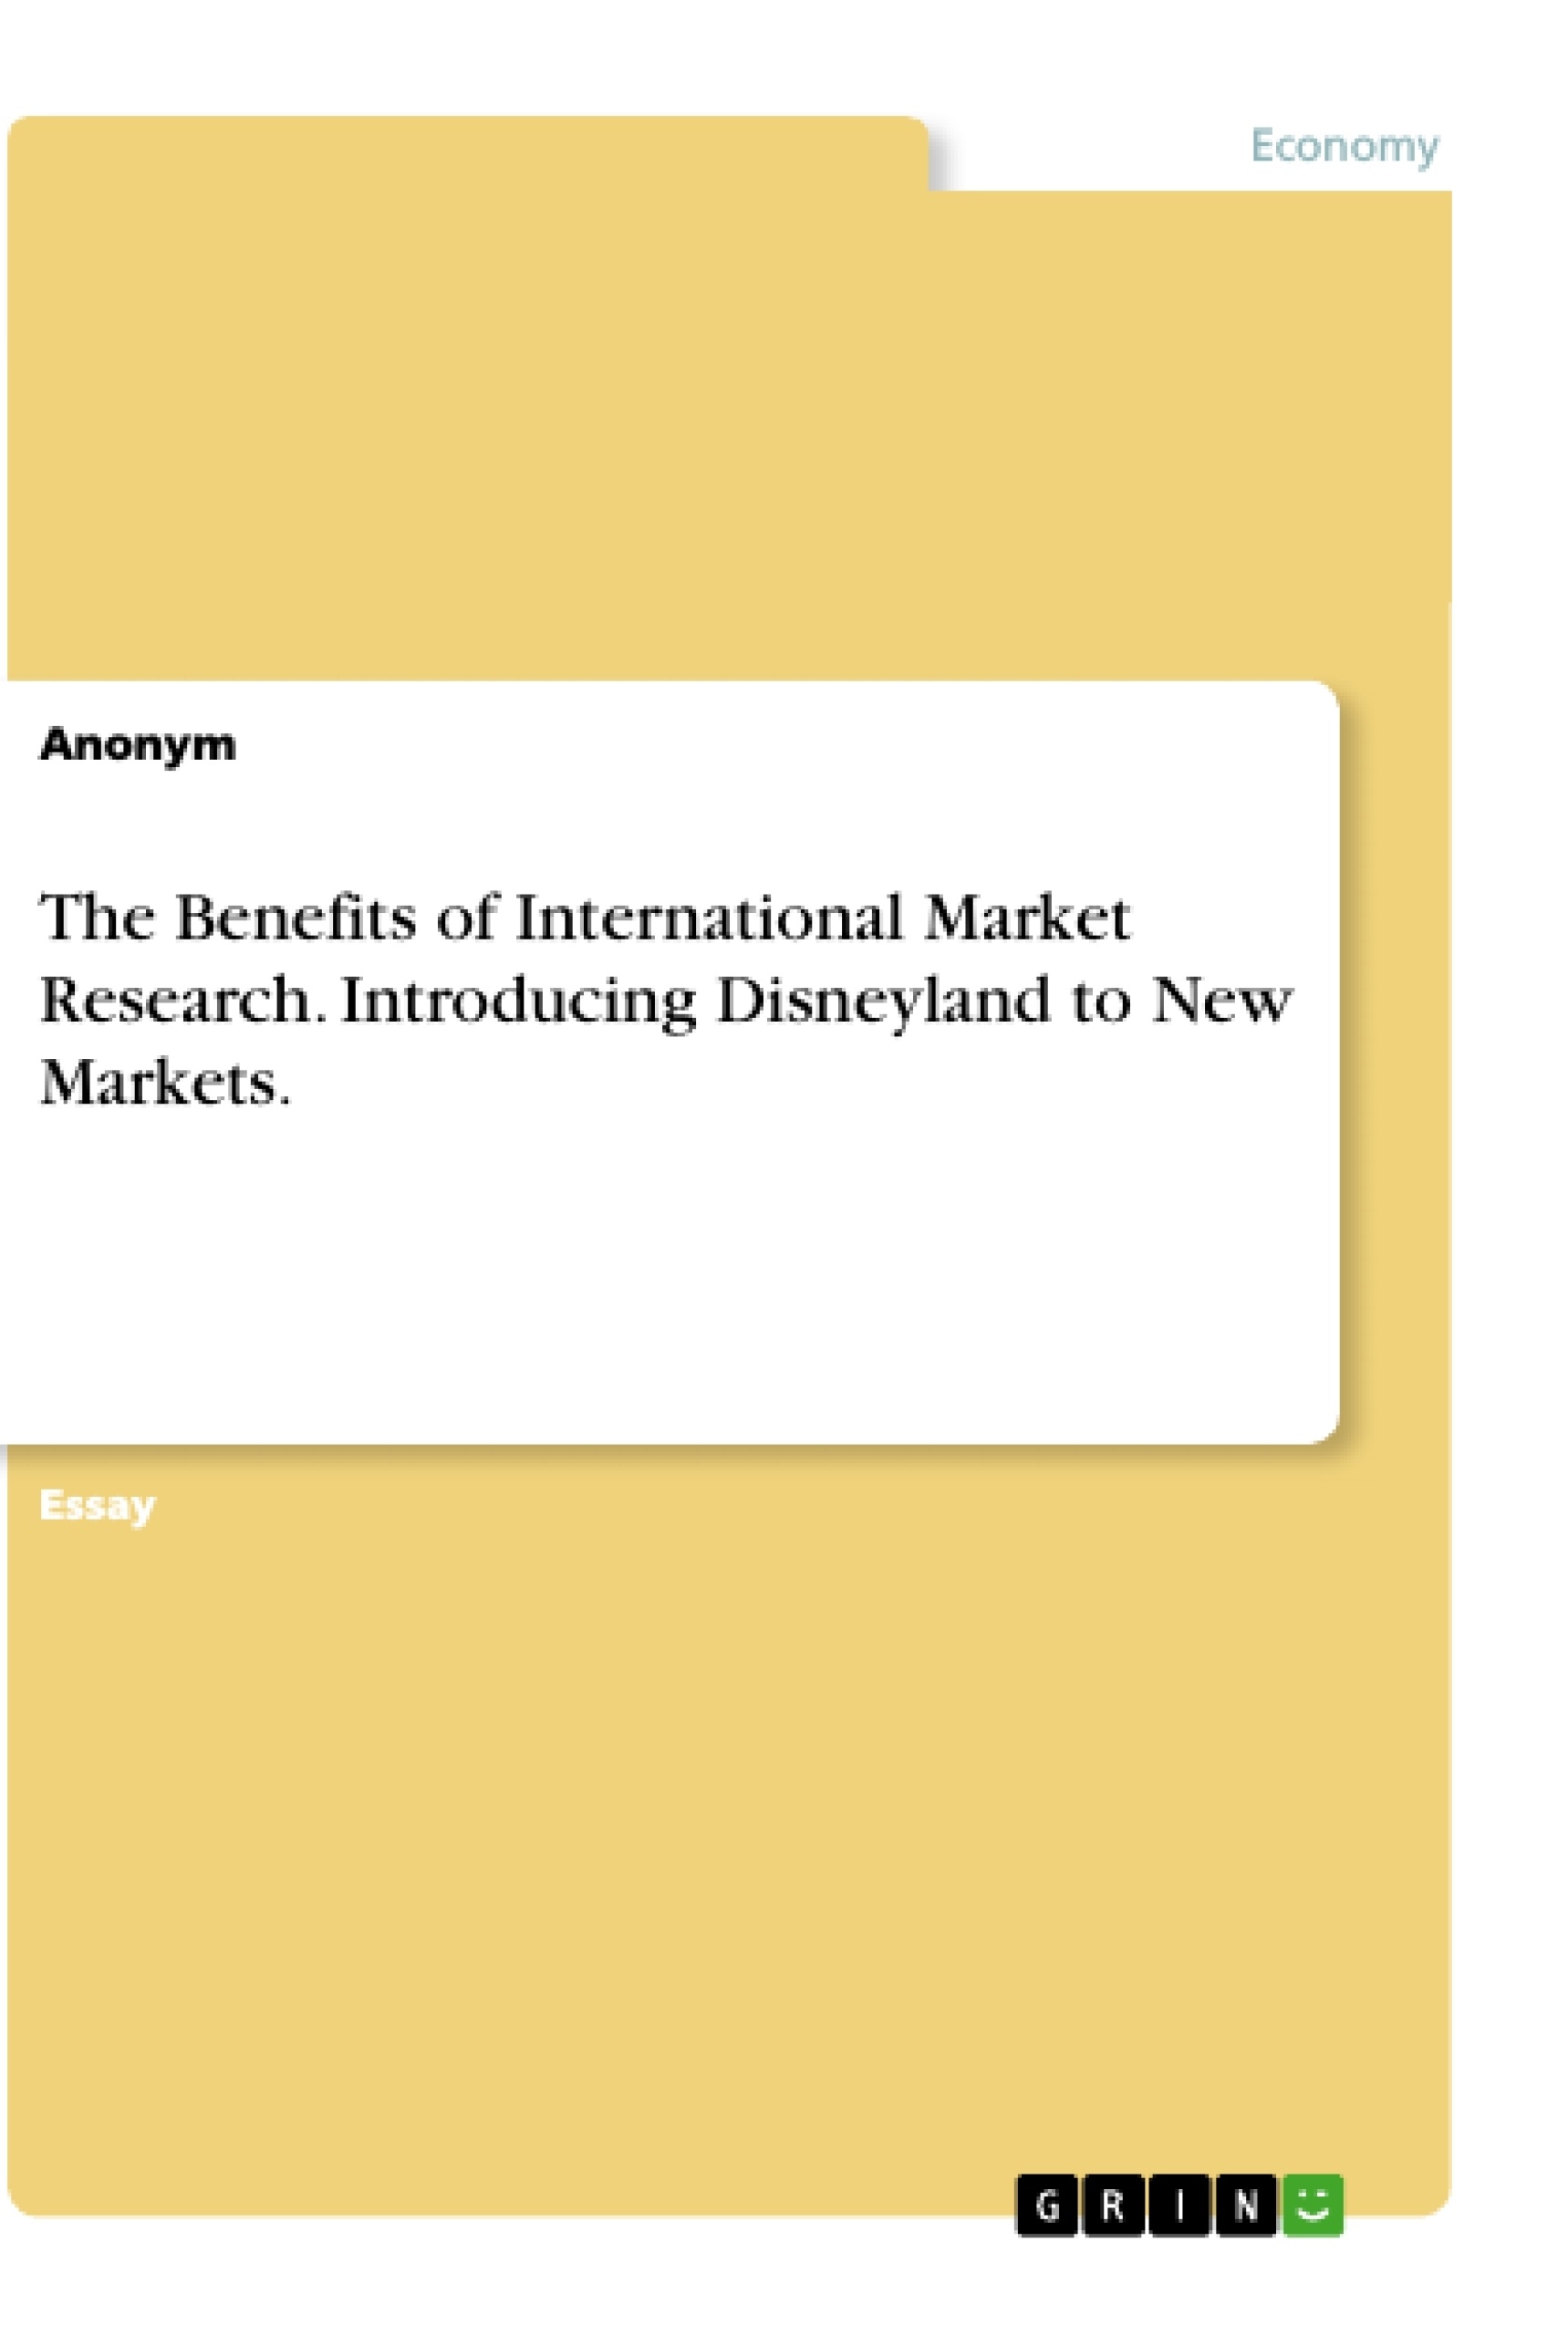 Title: The Benefits of International Market Research. Introducing Disneyland to New Markets.